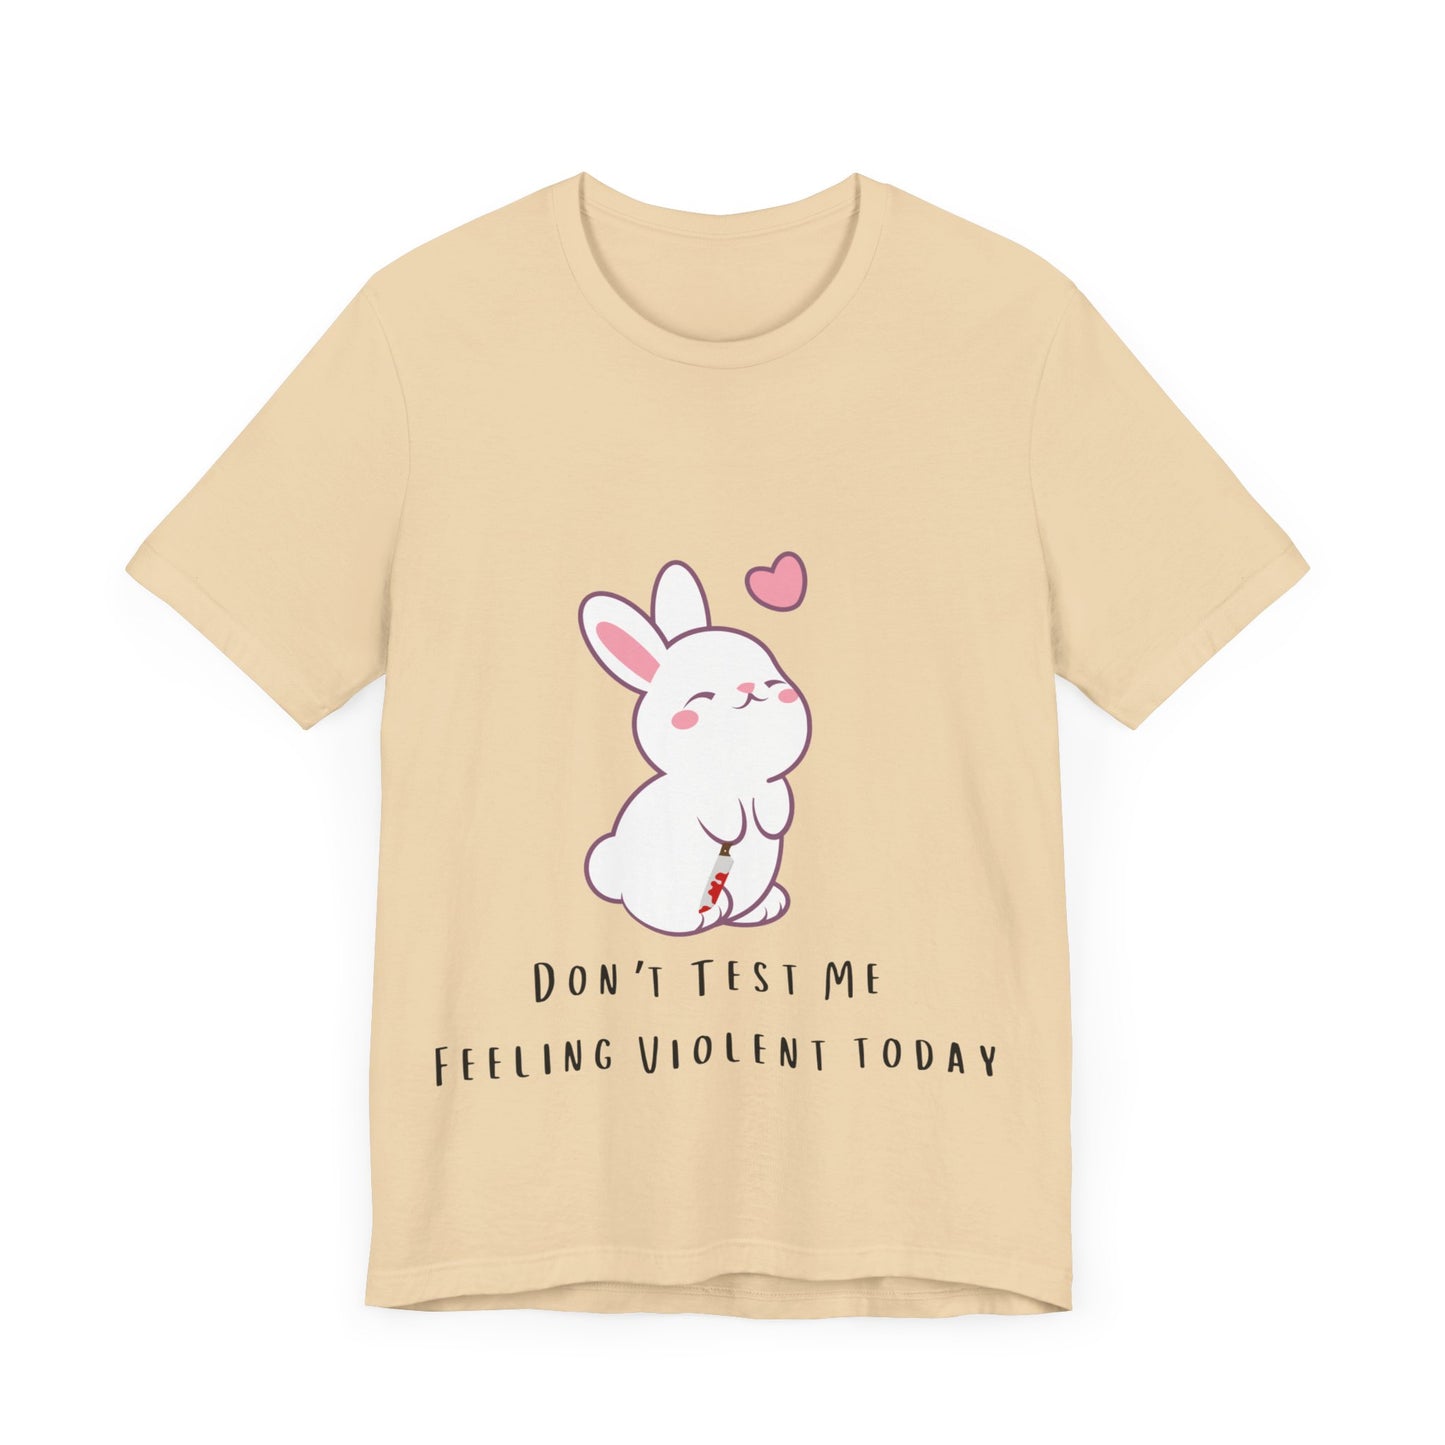 Don't Test Me! Short Sleeve Tee